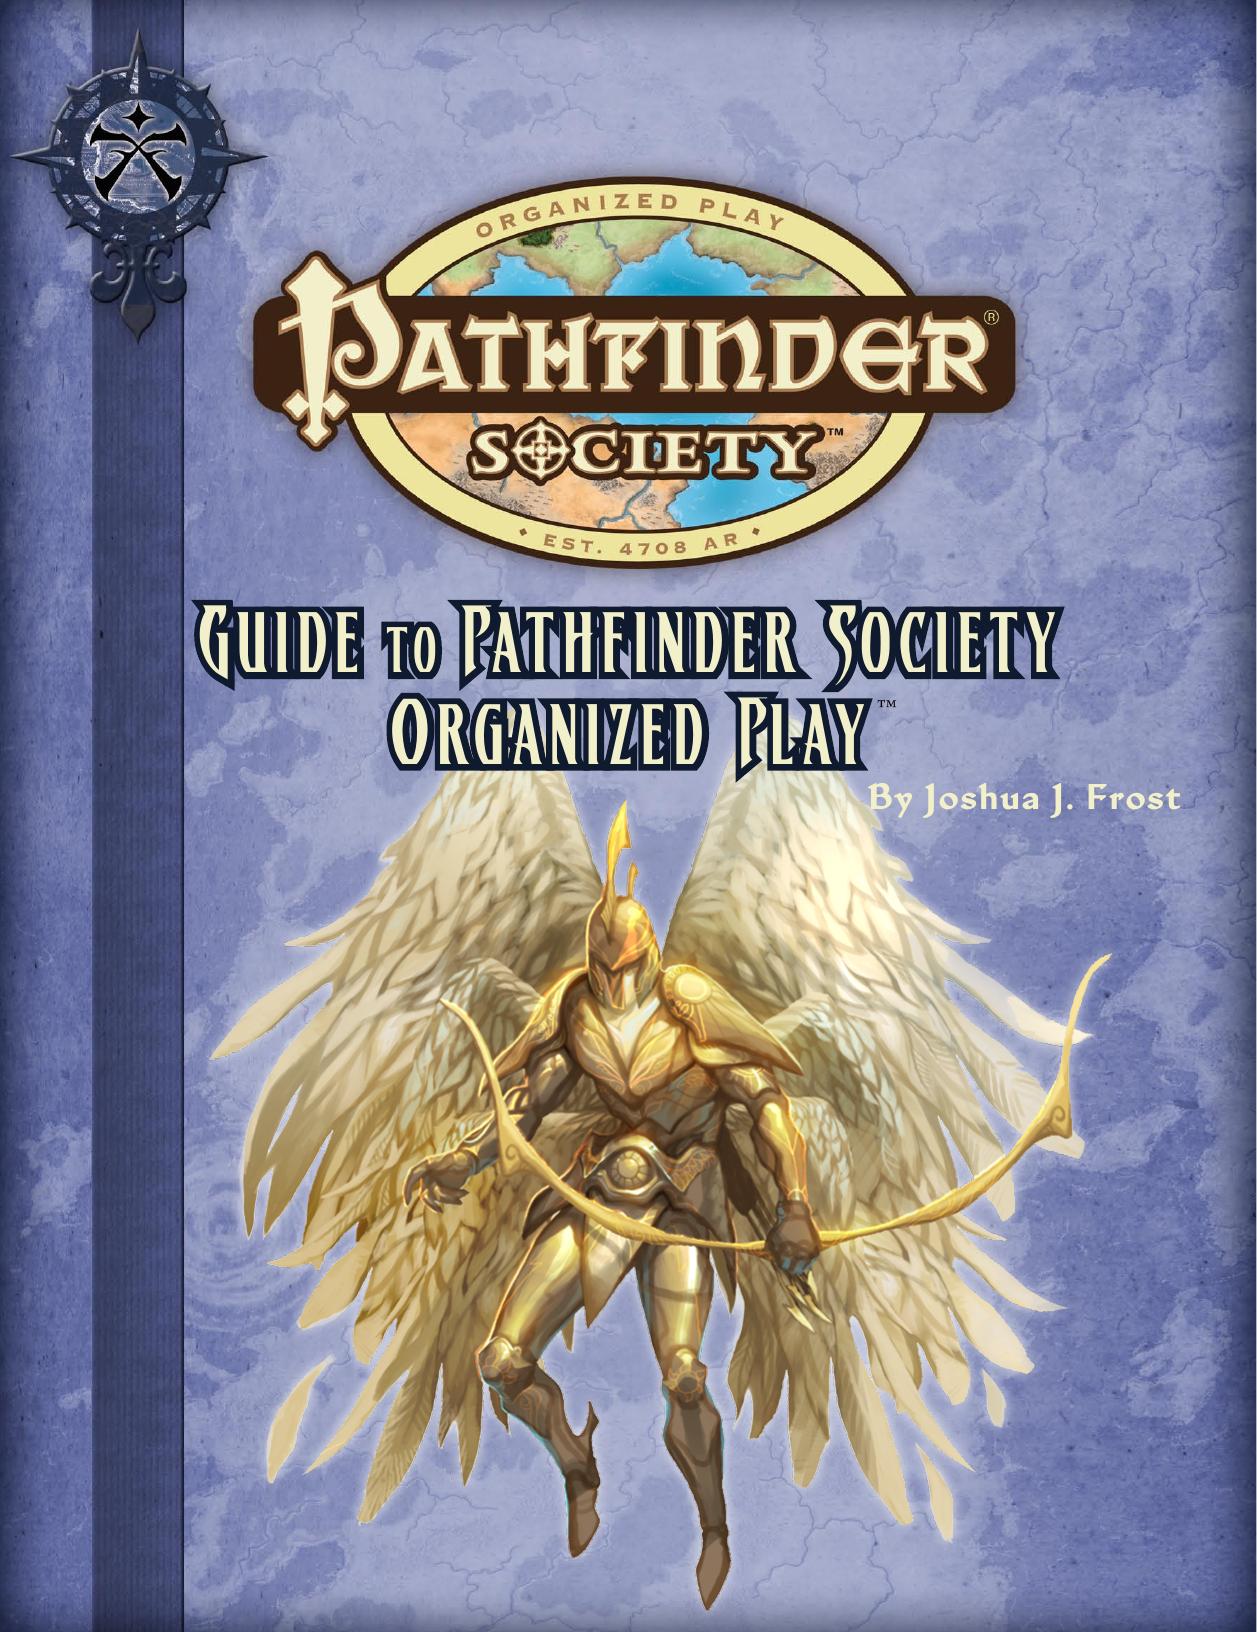 Guide to Pathfinder Society Organized Play 3.0.2